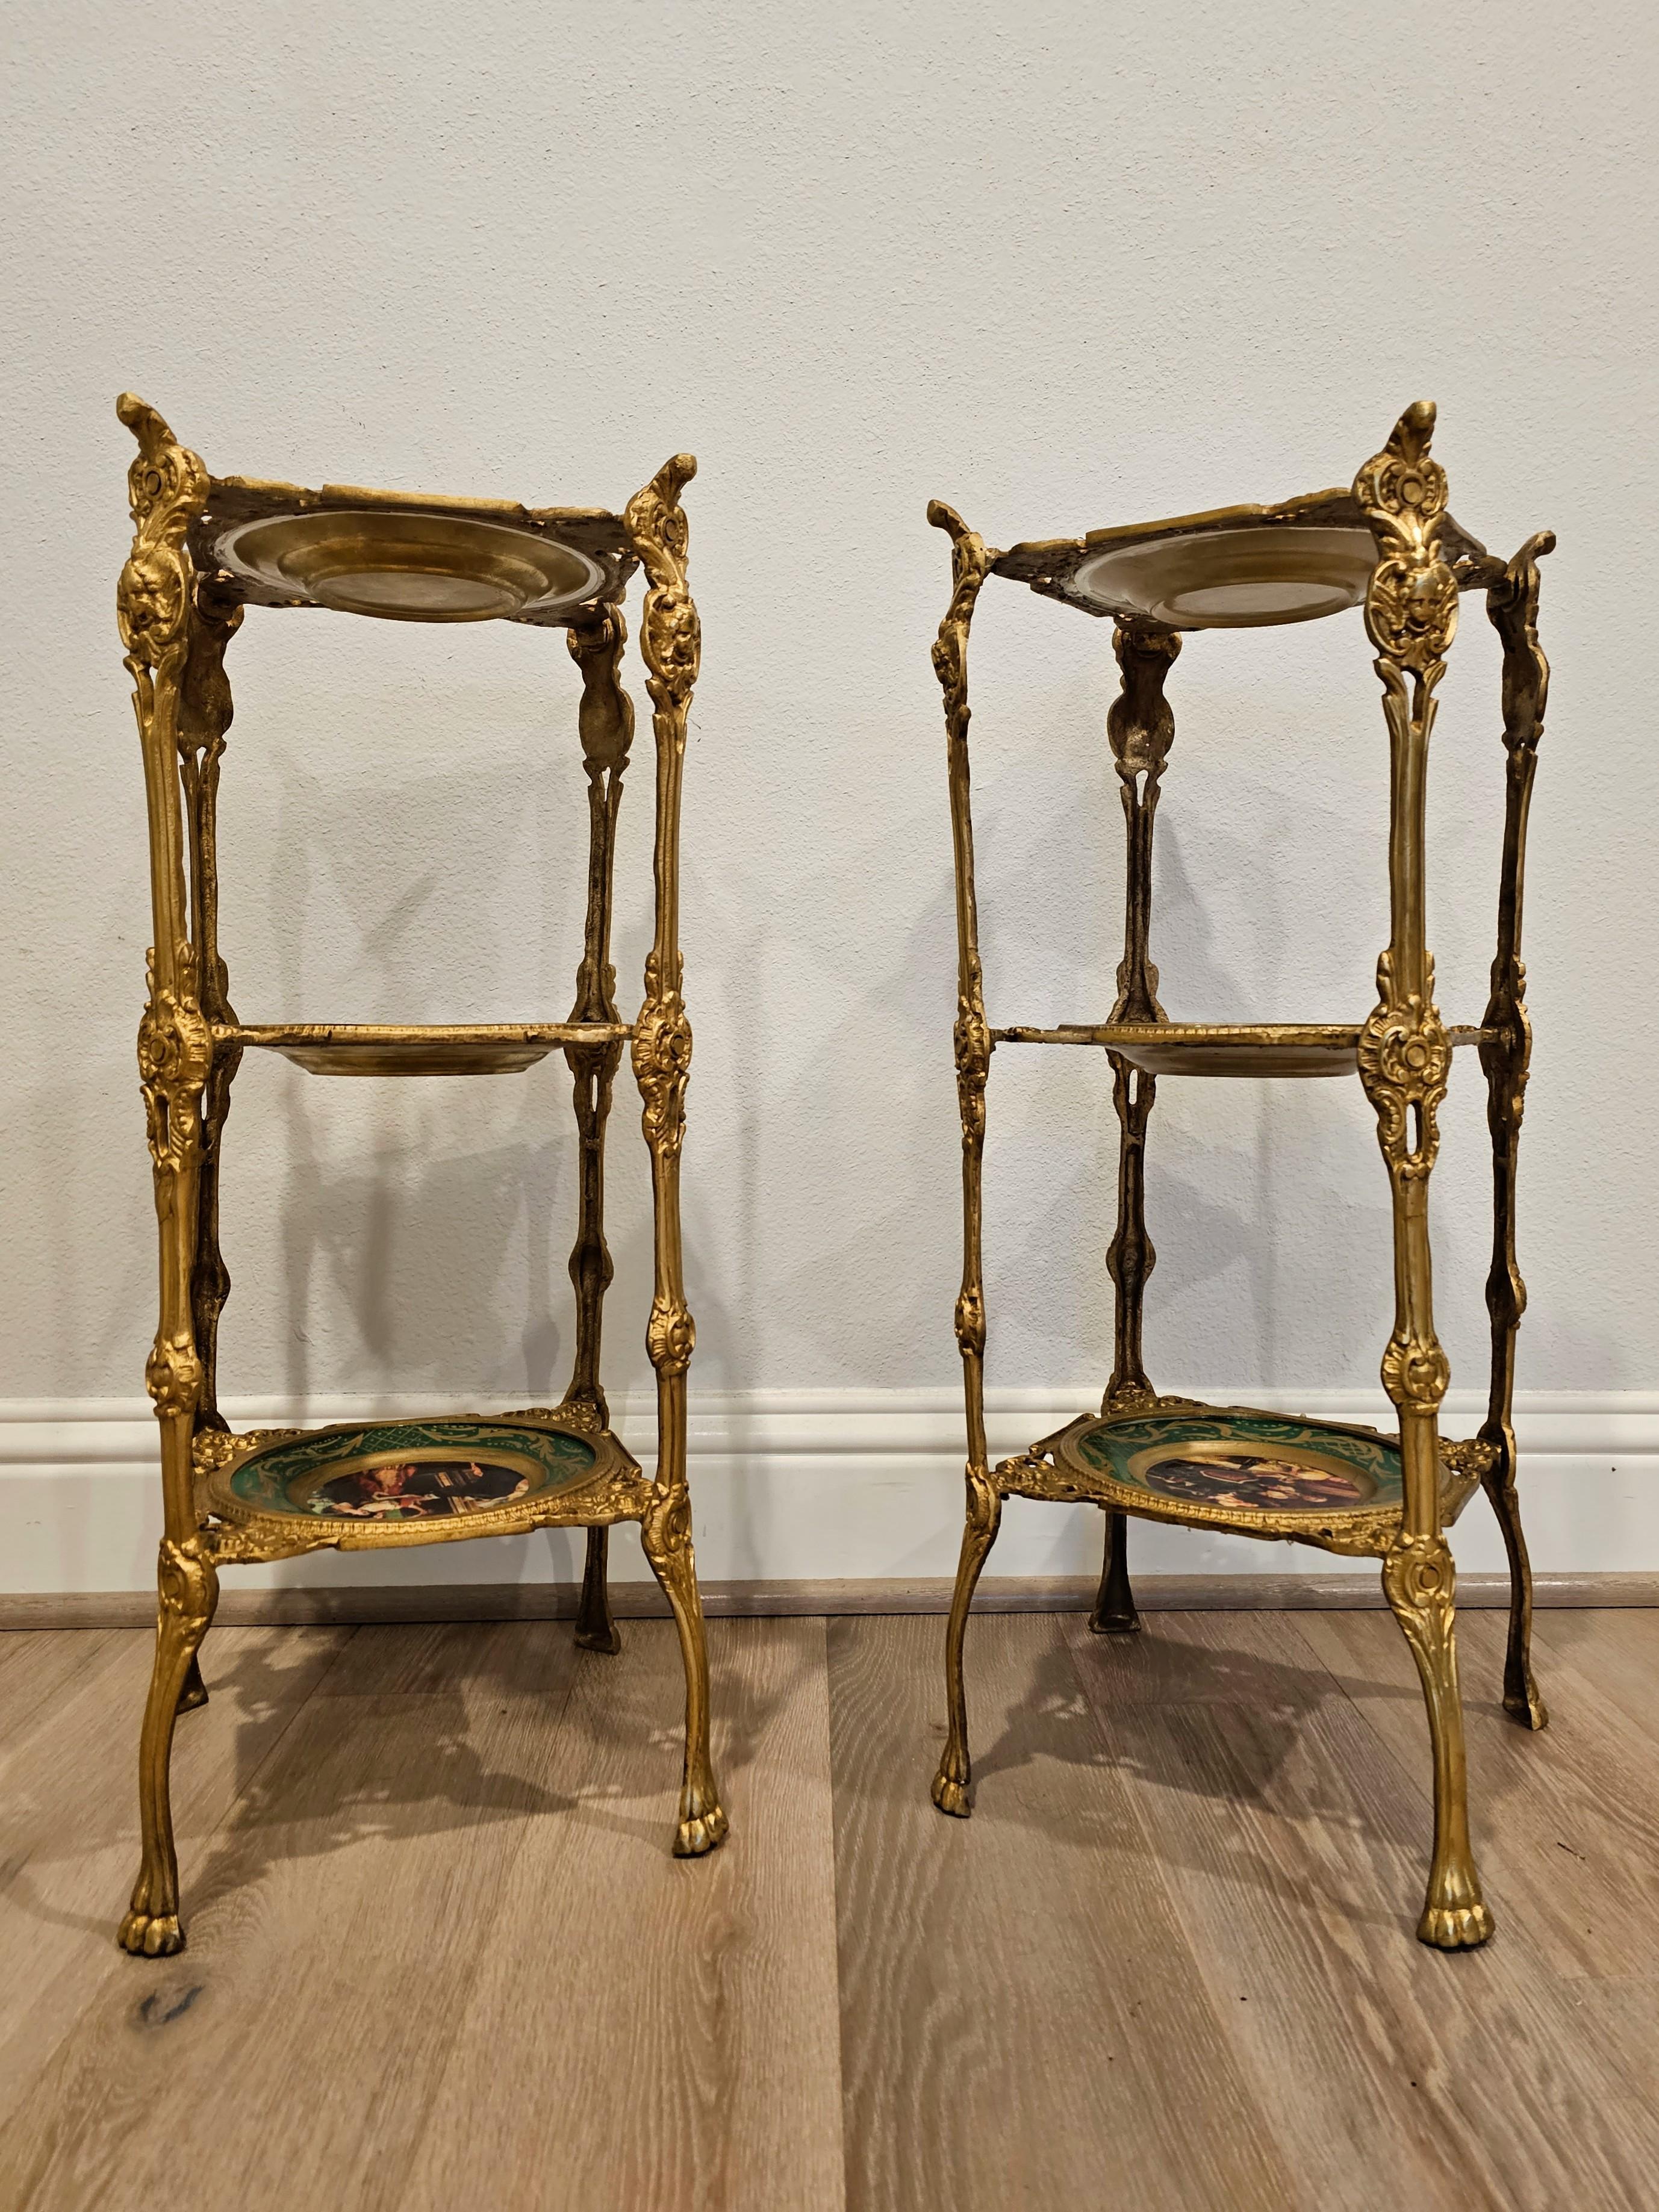 Fine Aesthetic Movement Ormolu Porcelain Tiered Étagères, End Tables In Excellent Condition For Sale In Forney, TX